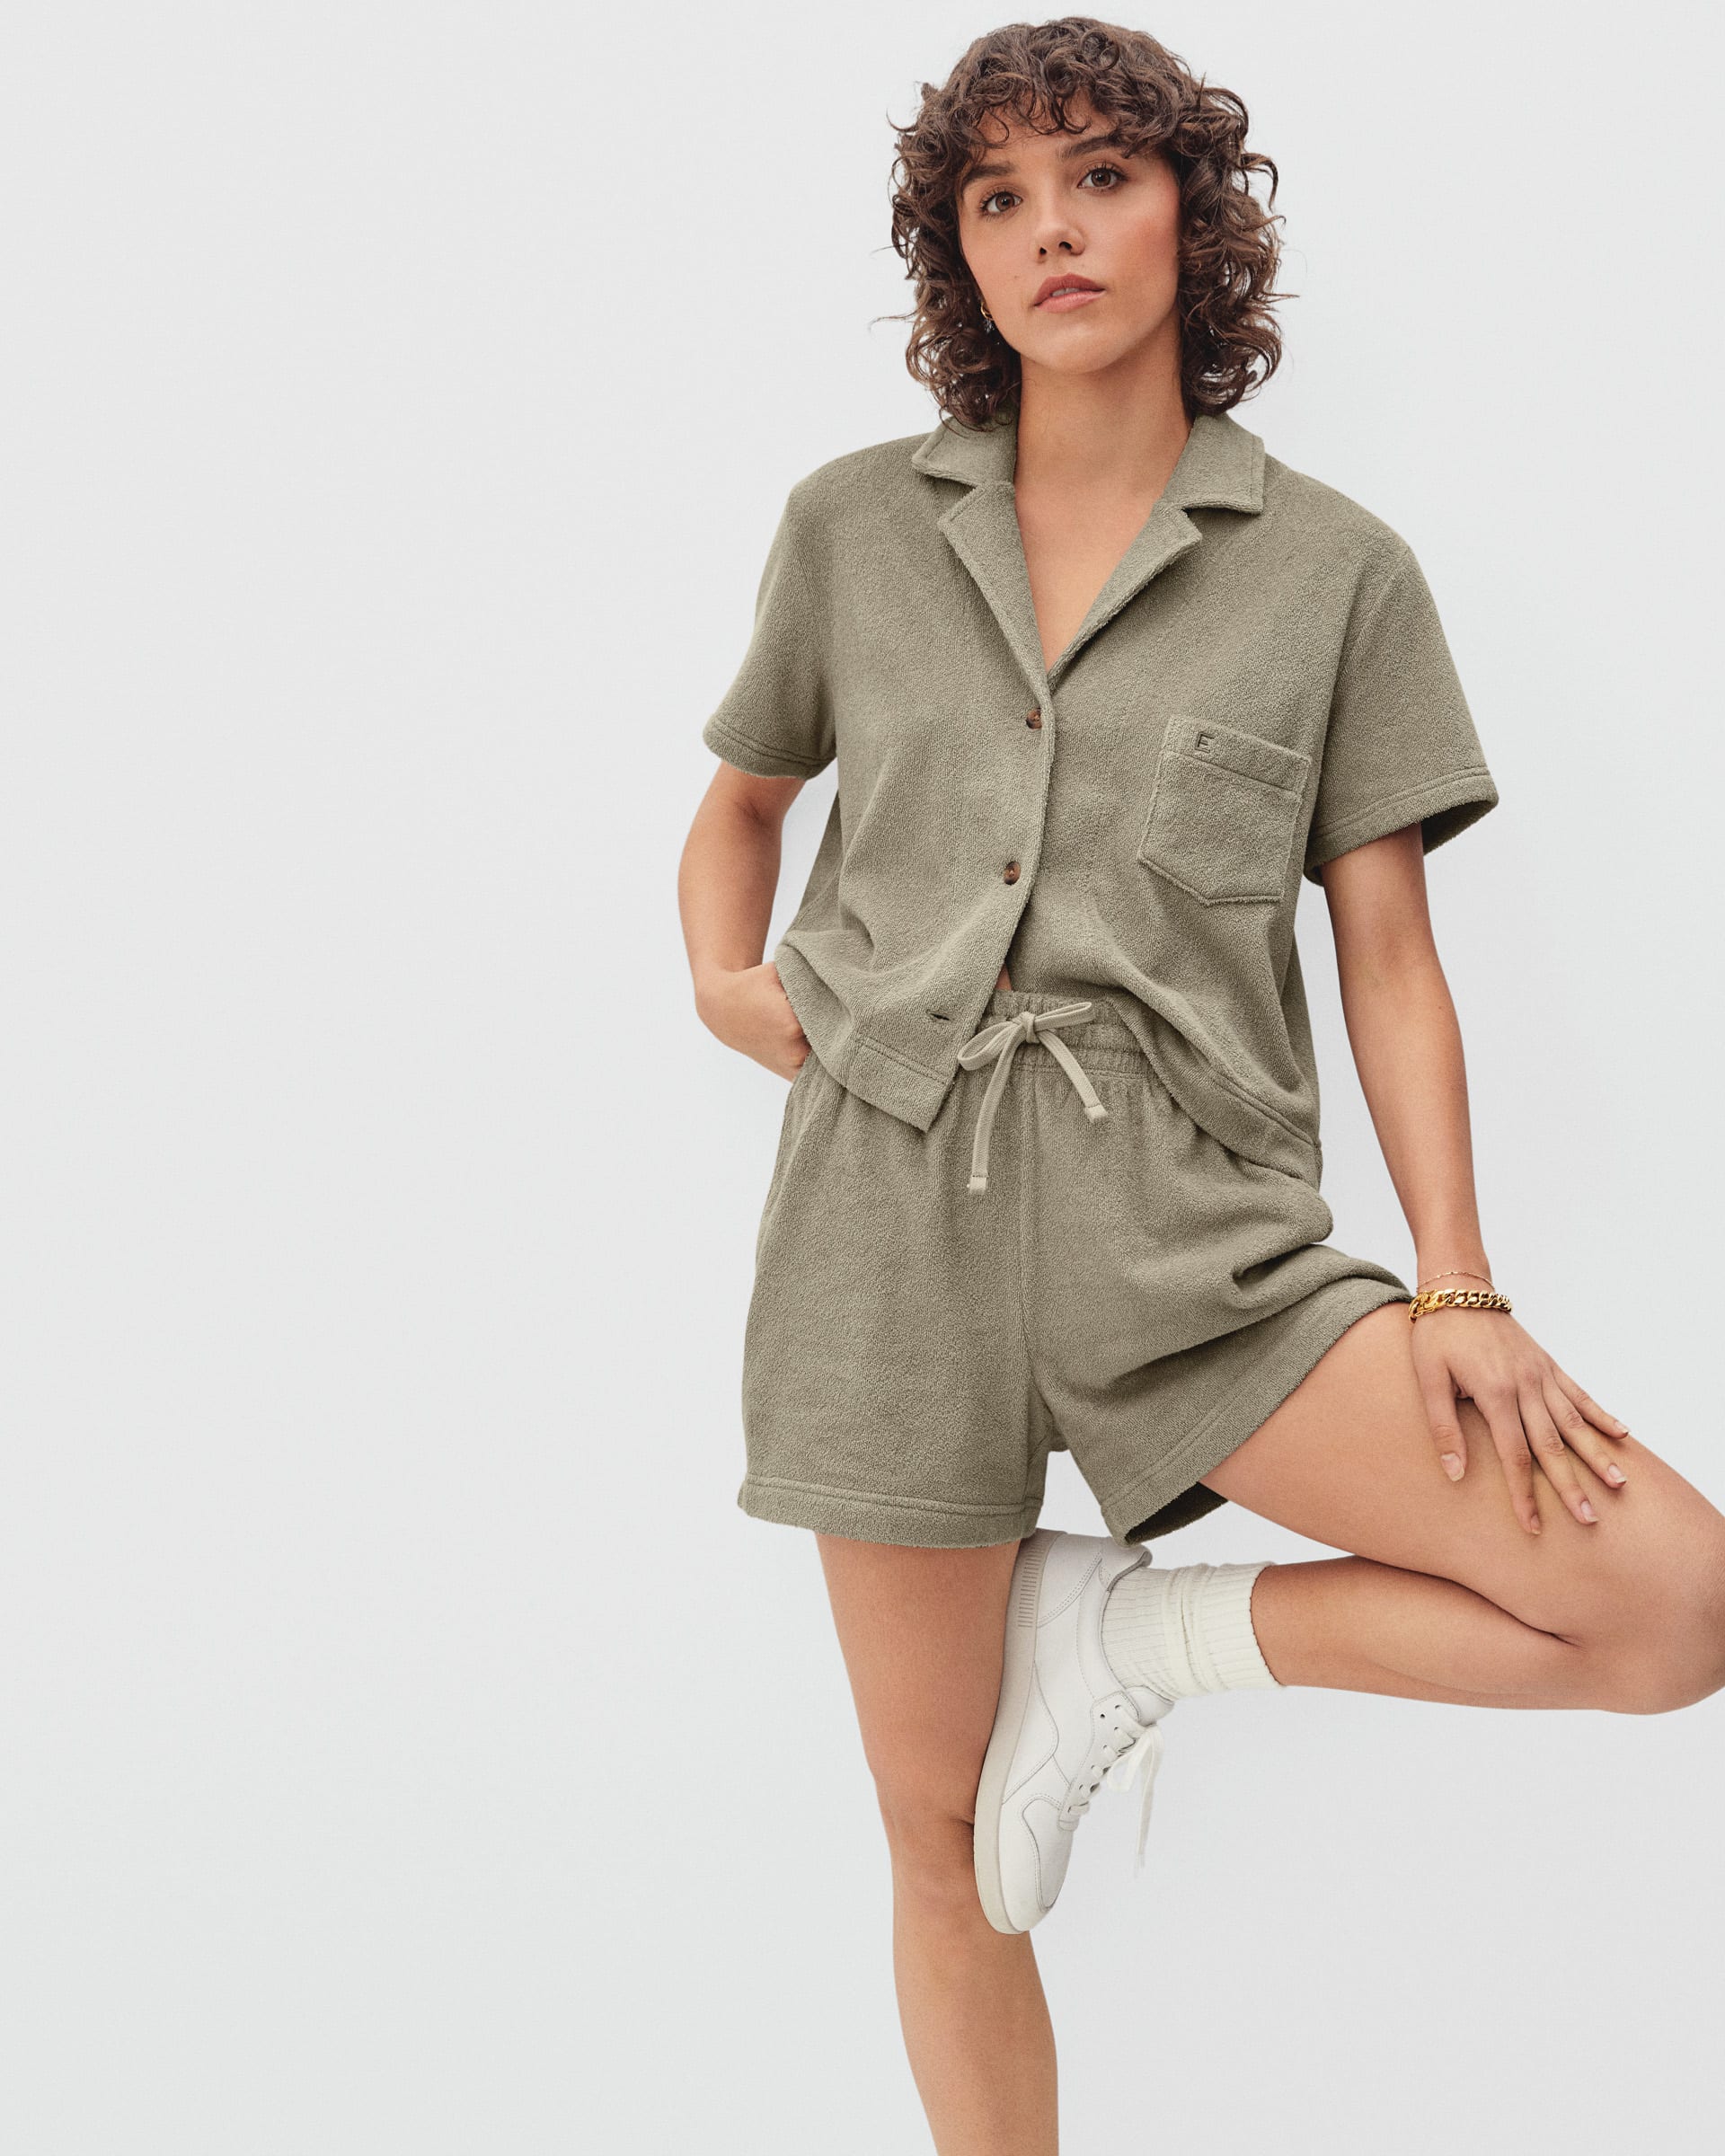 The Terry Cloth Short Field Green – Everlane